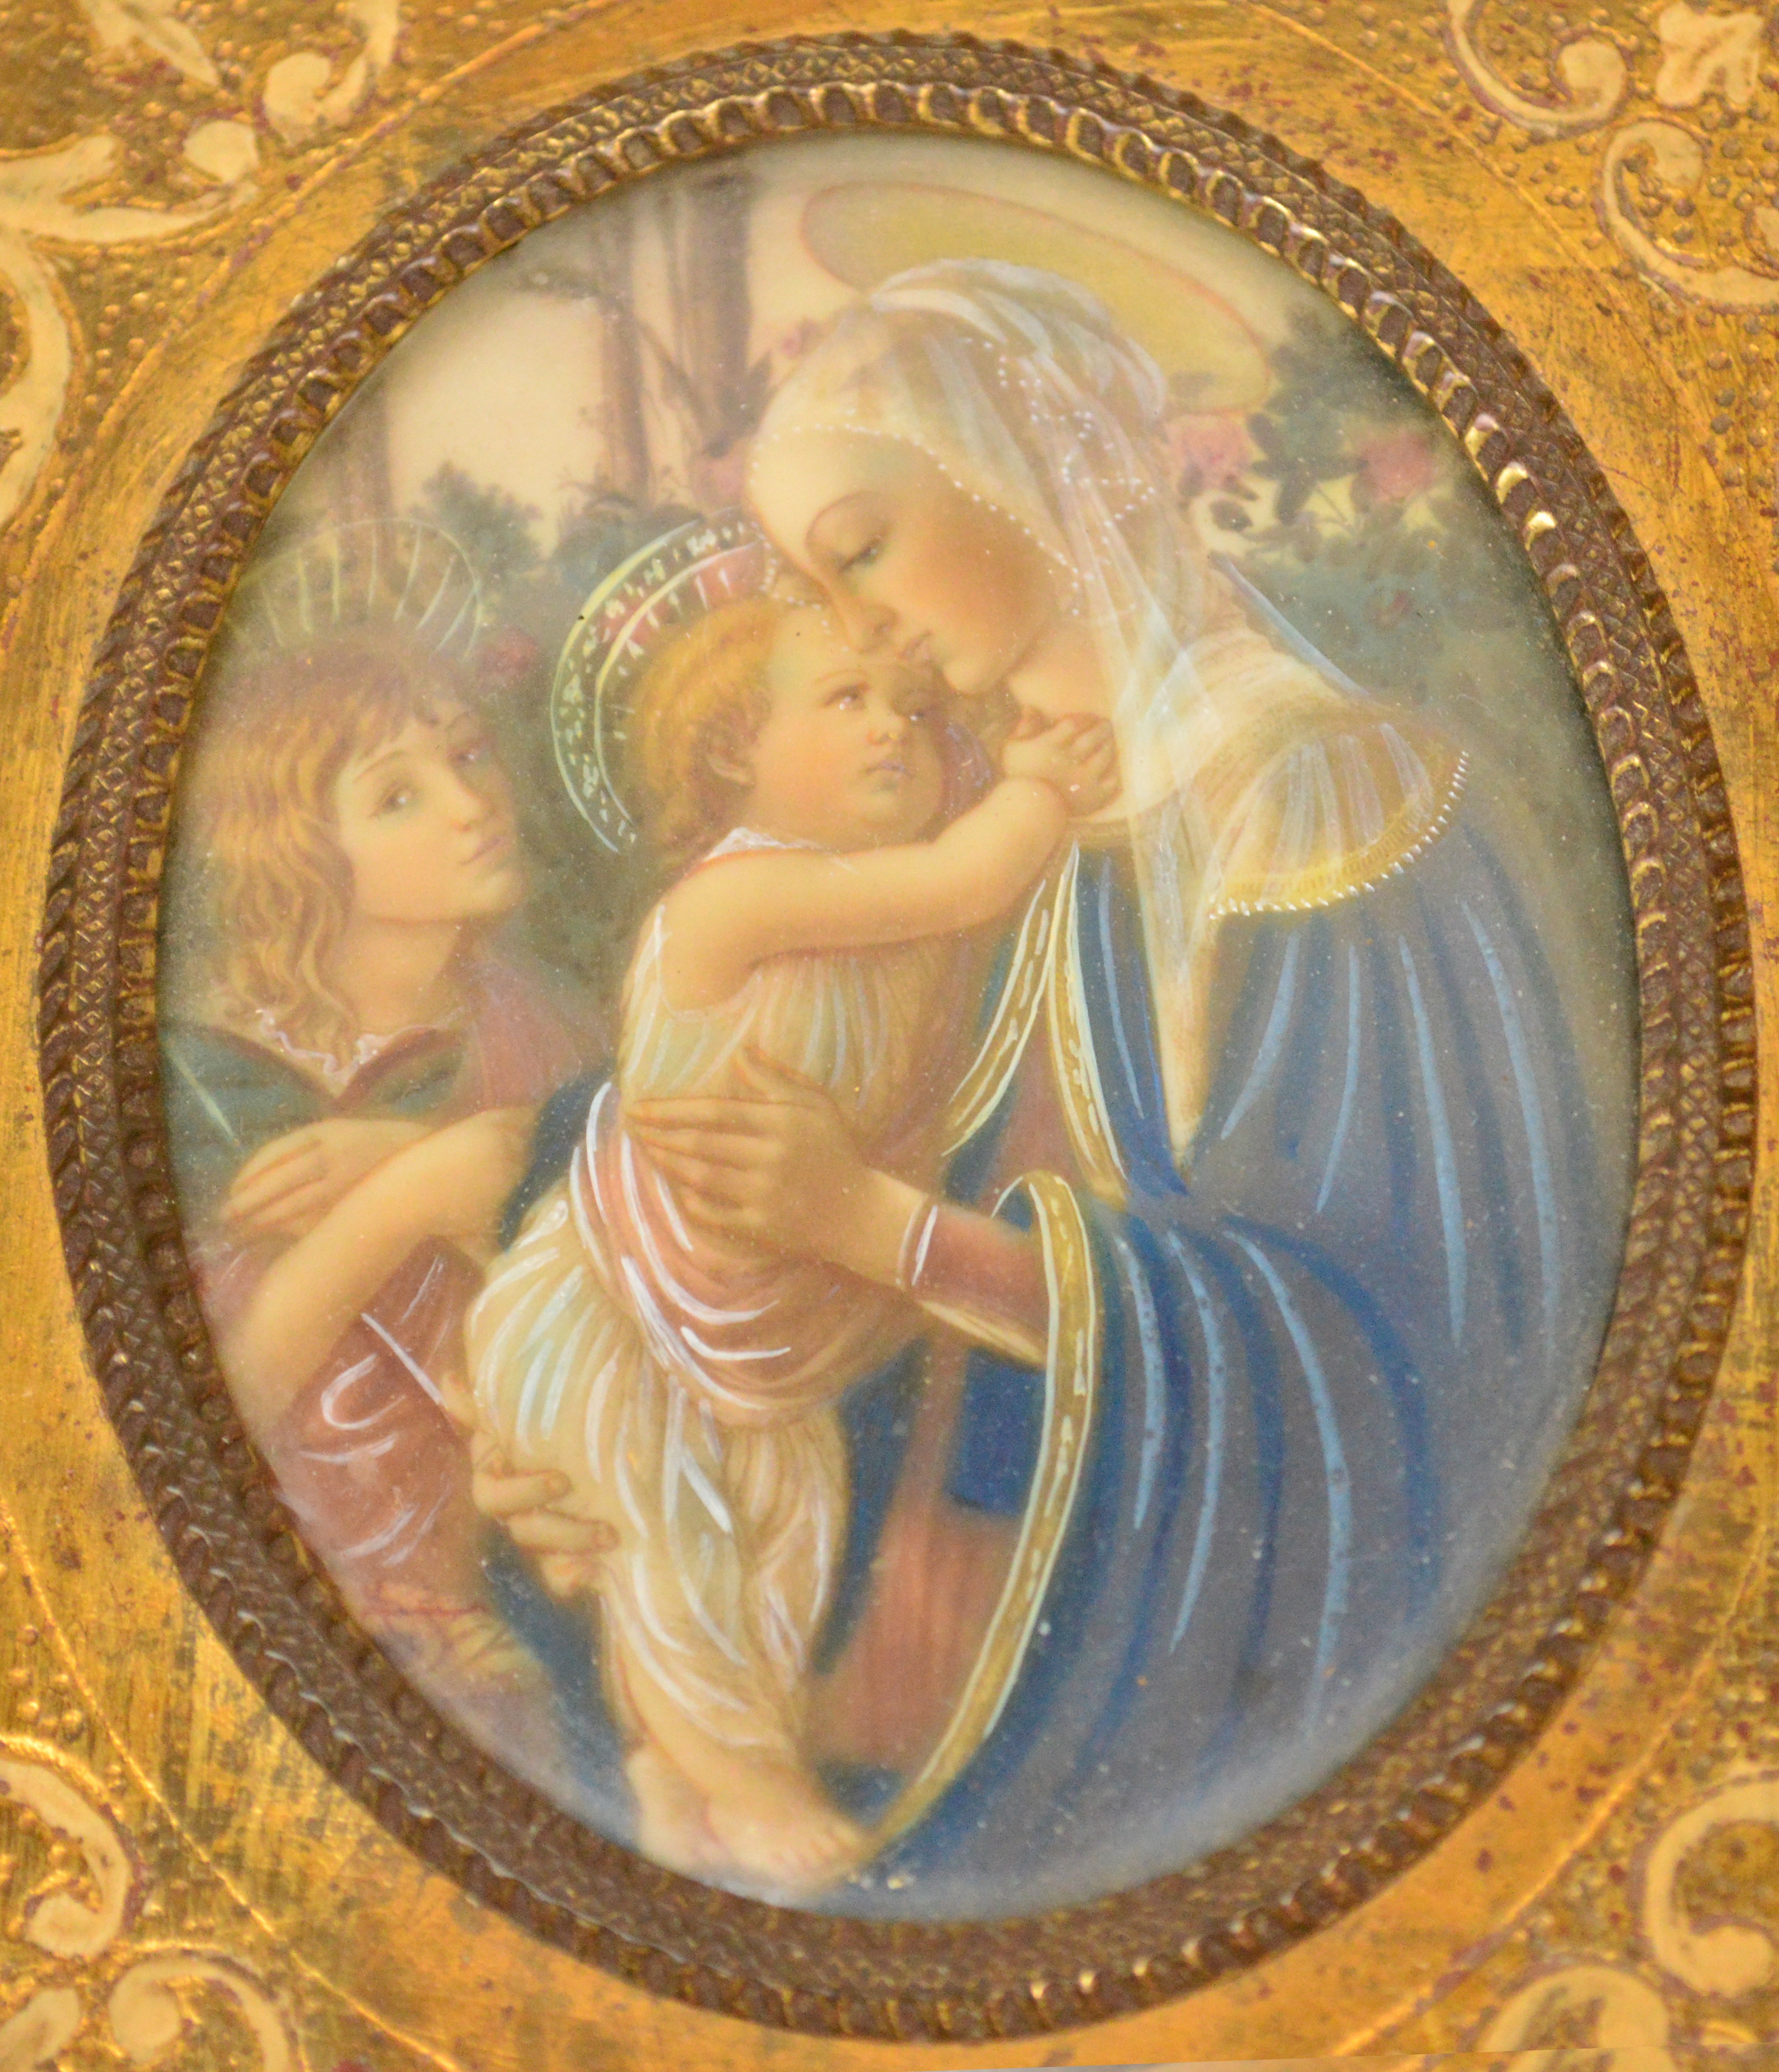 An early/mid 20th century oval portrait miniature after Botticelli, "Madonna of The Rose Garden",